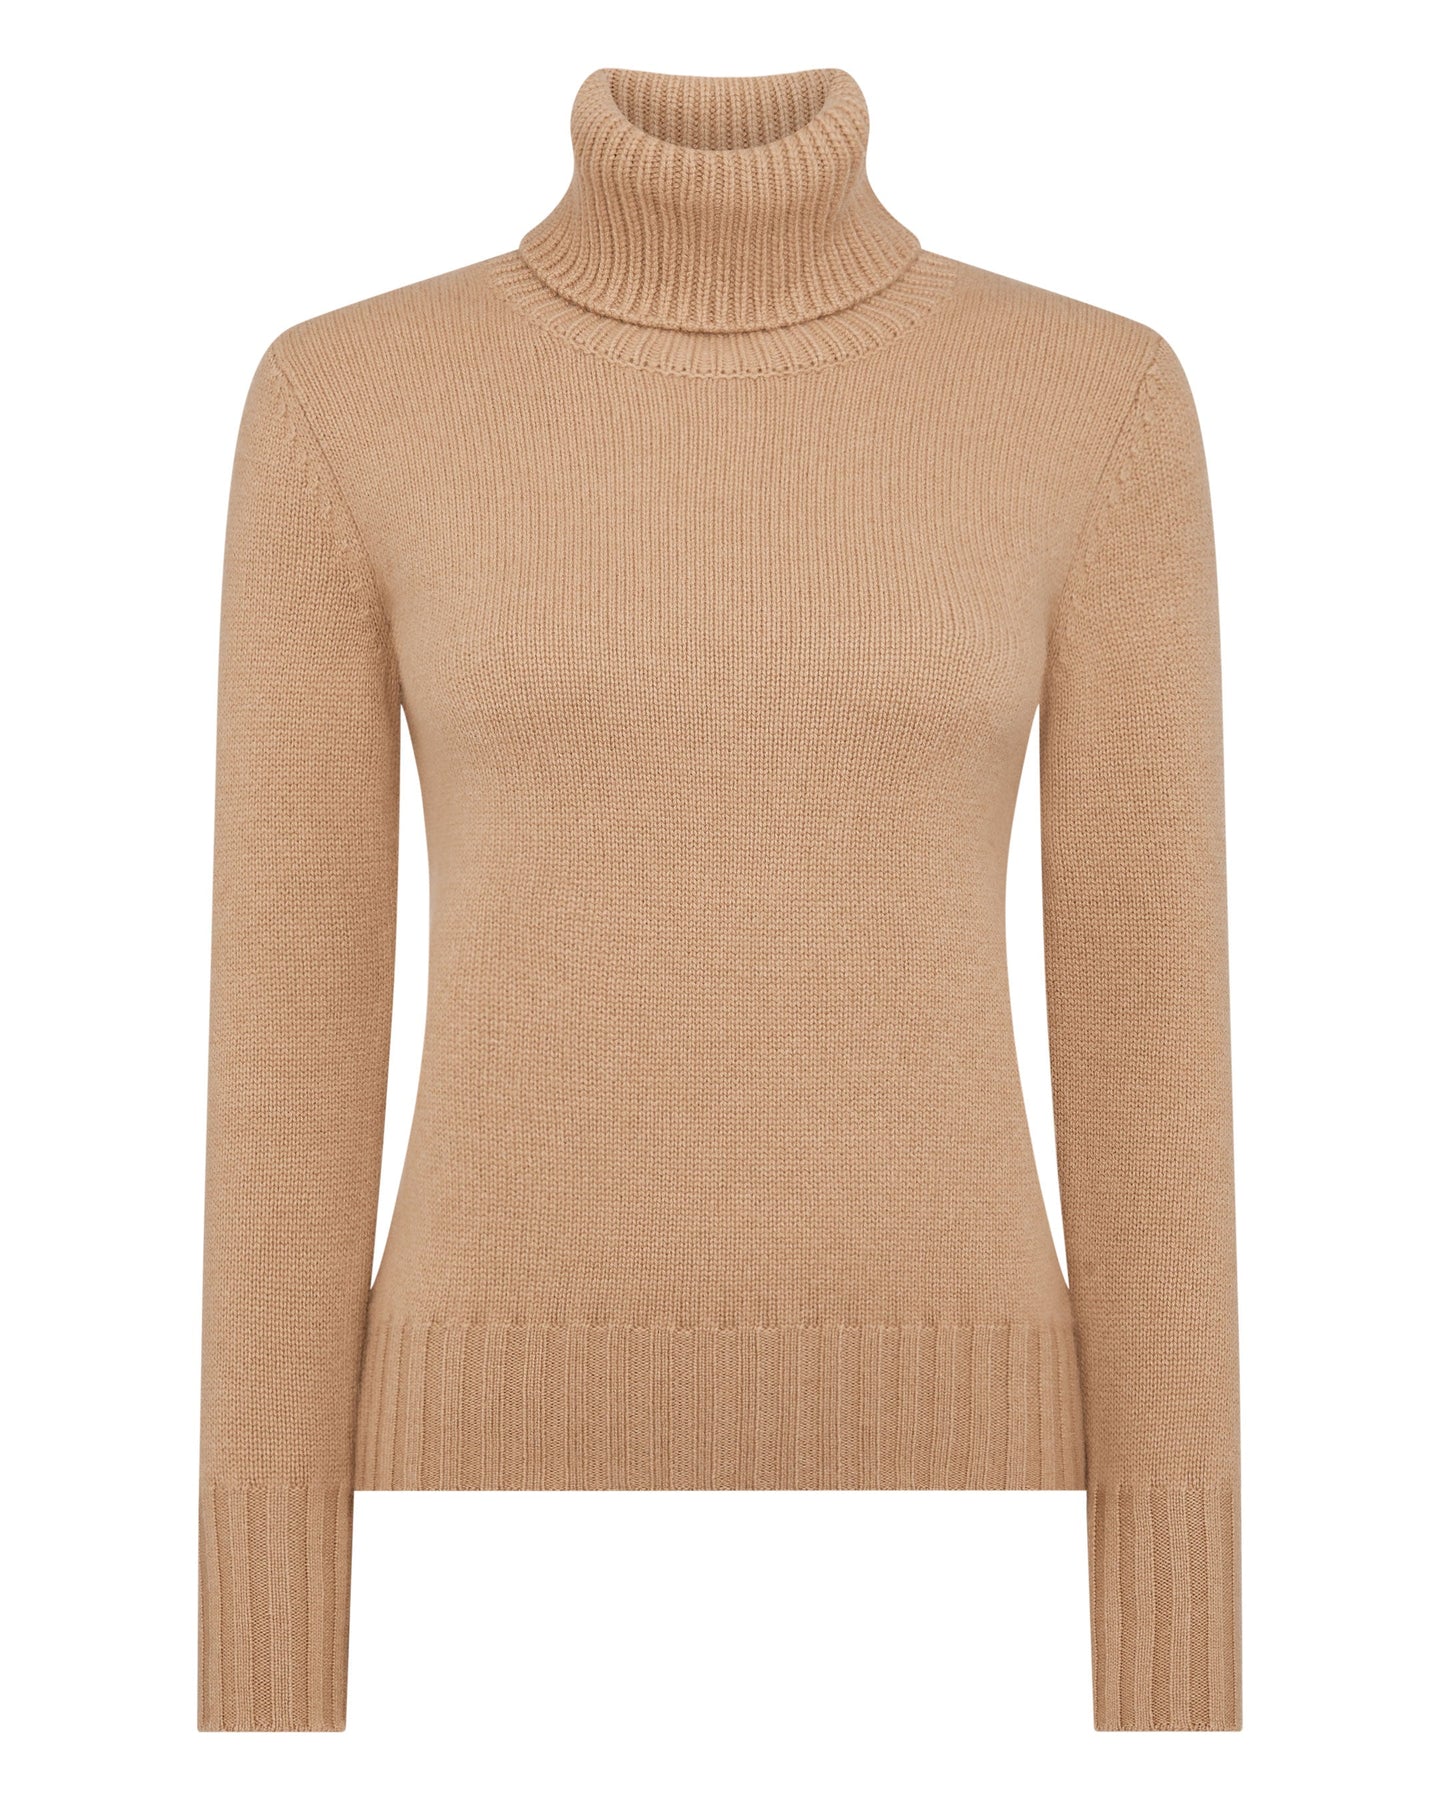 N.Peal Women's Chunky Roll Neck Cashmere Jumper Sahara Brown